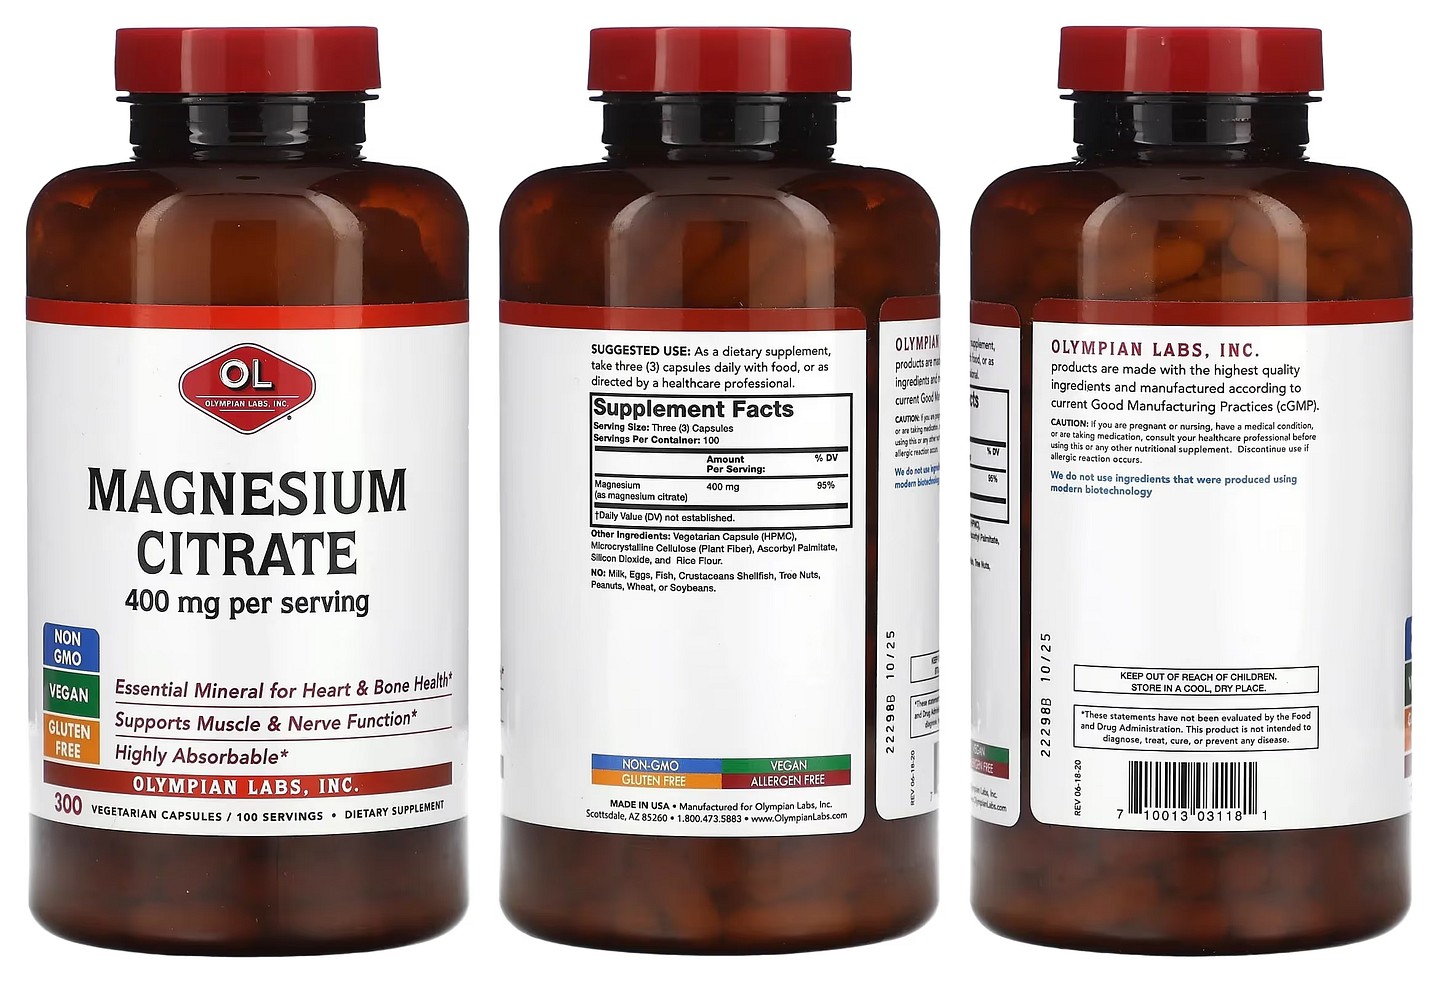 Olympian Labs, Magnesium Citrate packaging